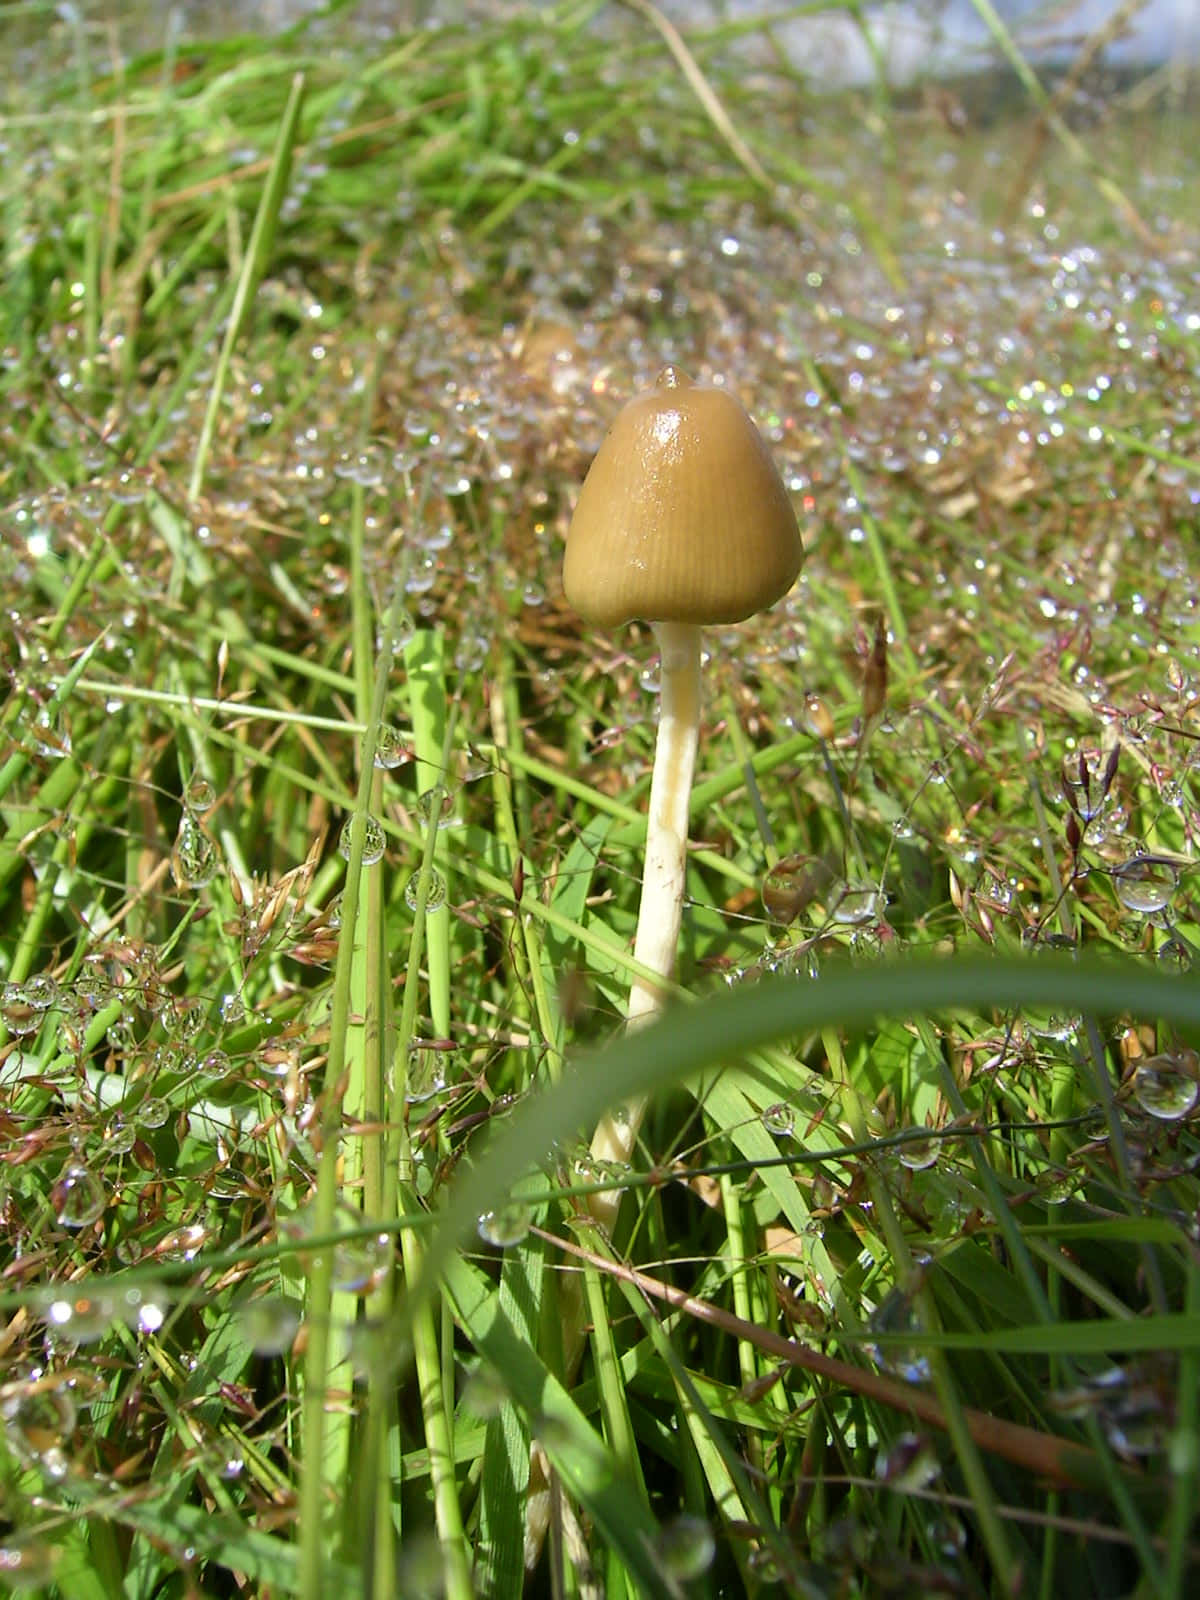 A Mushroom Growing In The Grass